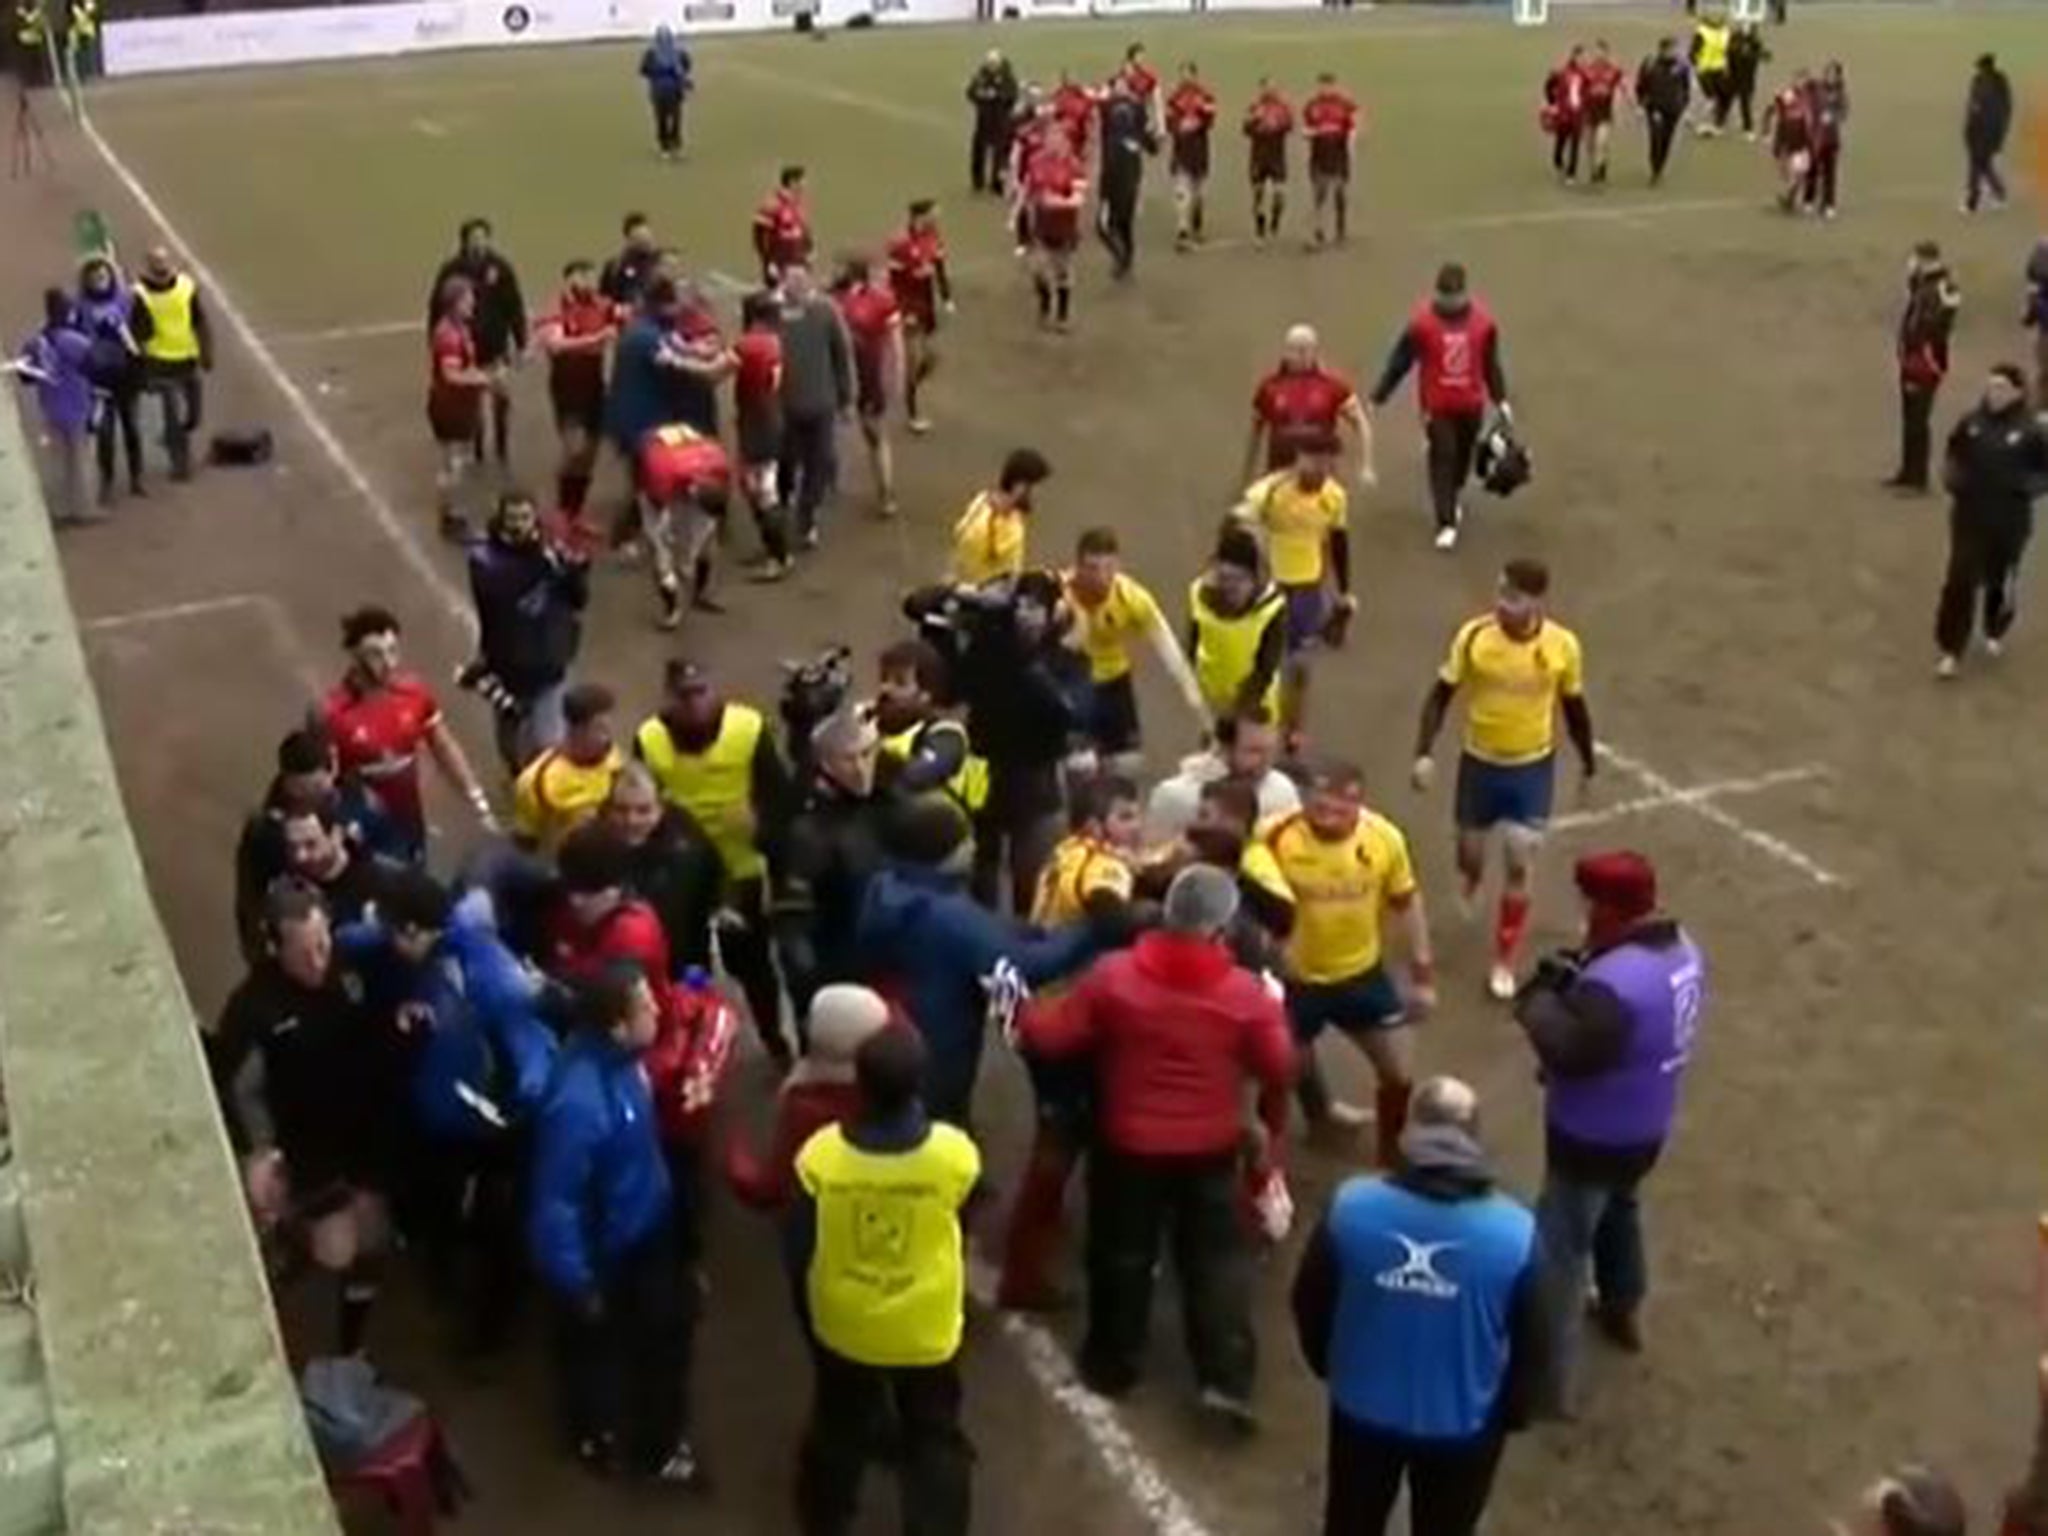 The incident is being looked at by both Rugby Europa and World Rugby